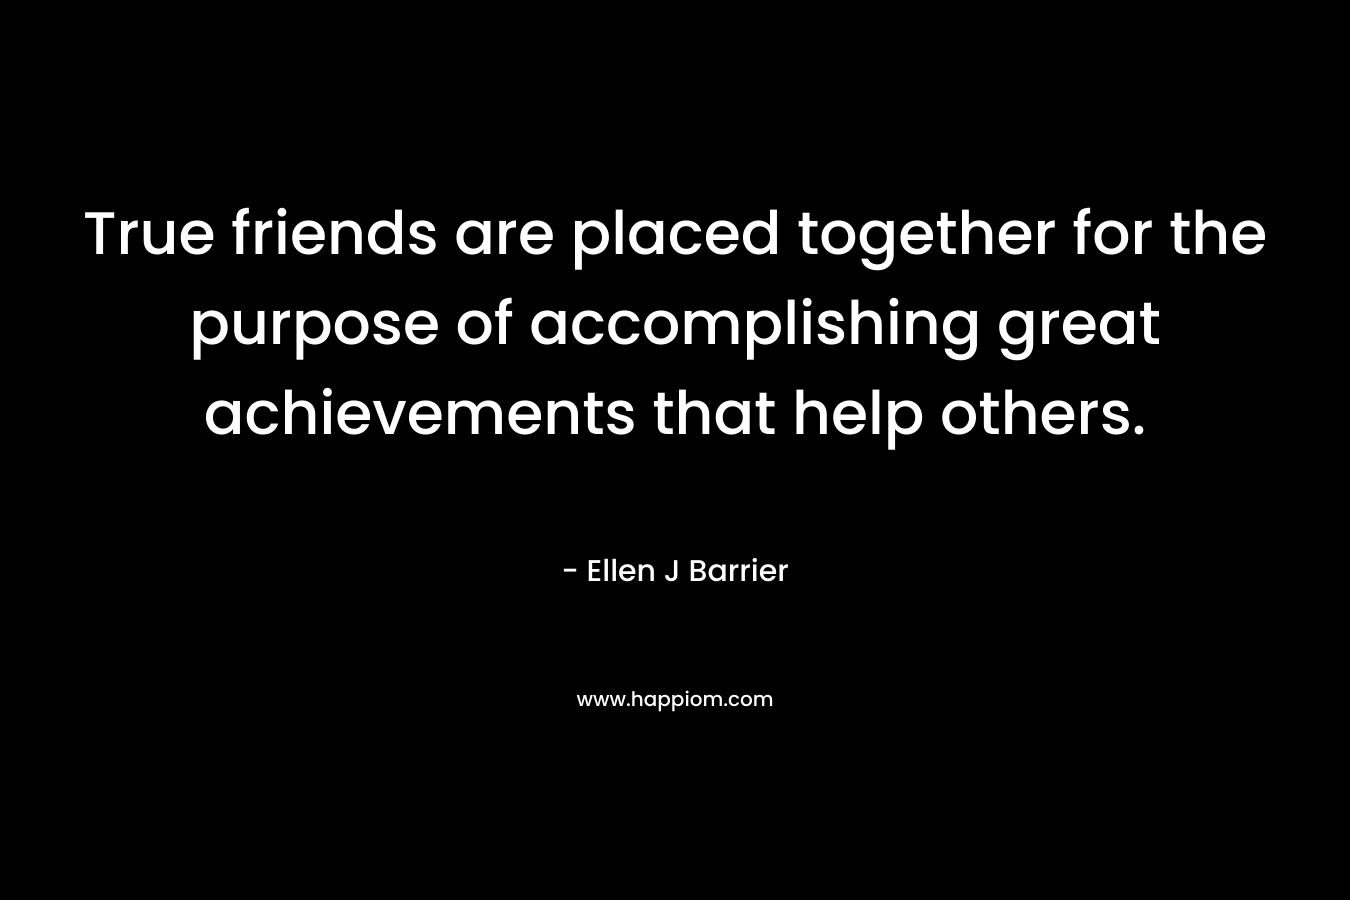 True friends are placed together for the purpose of accomplishing great achievements that help others.